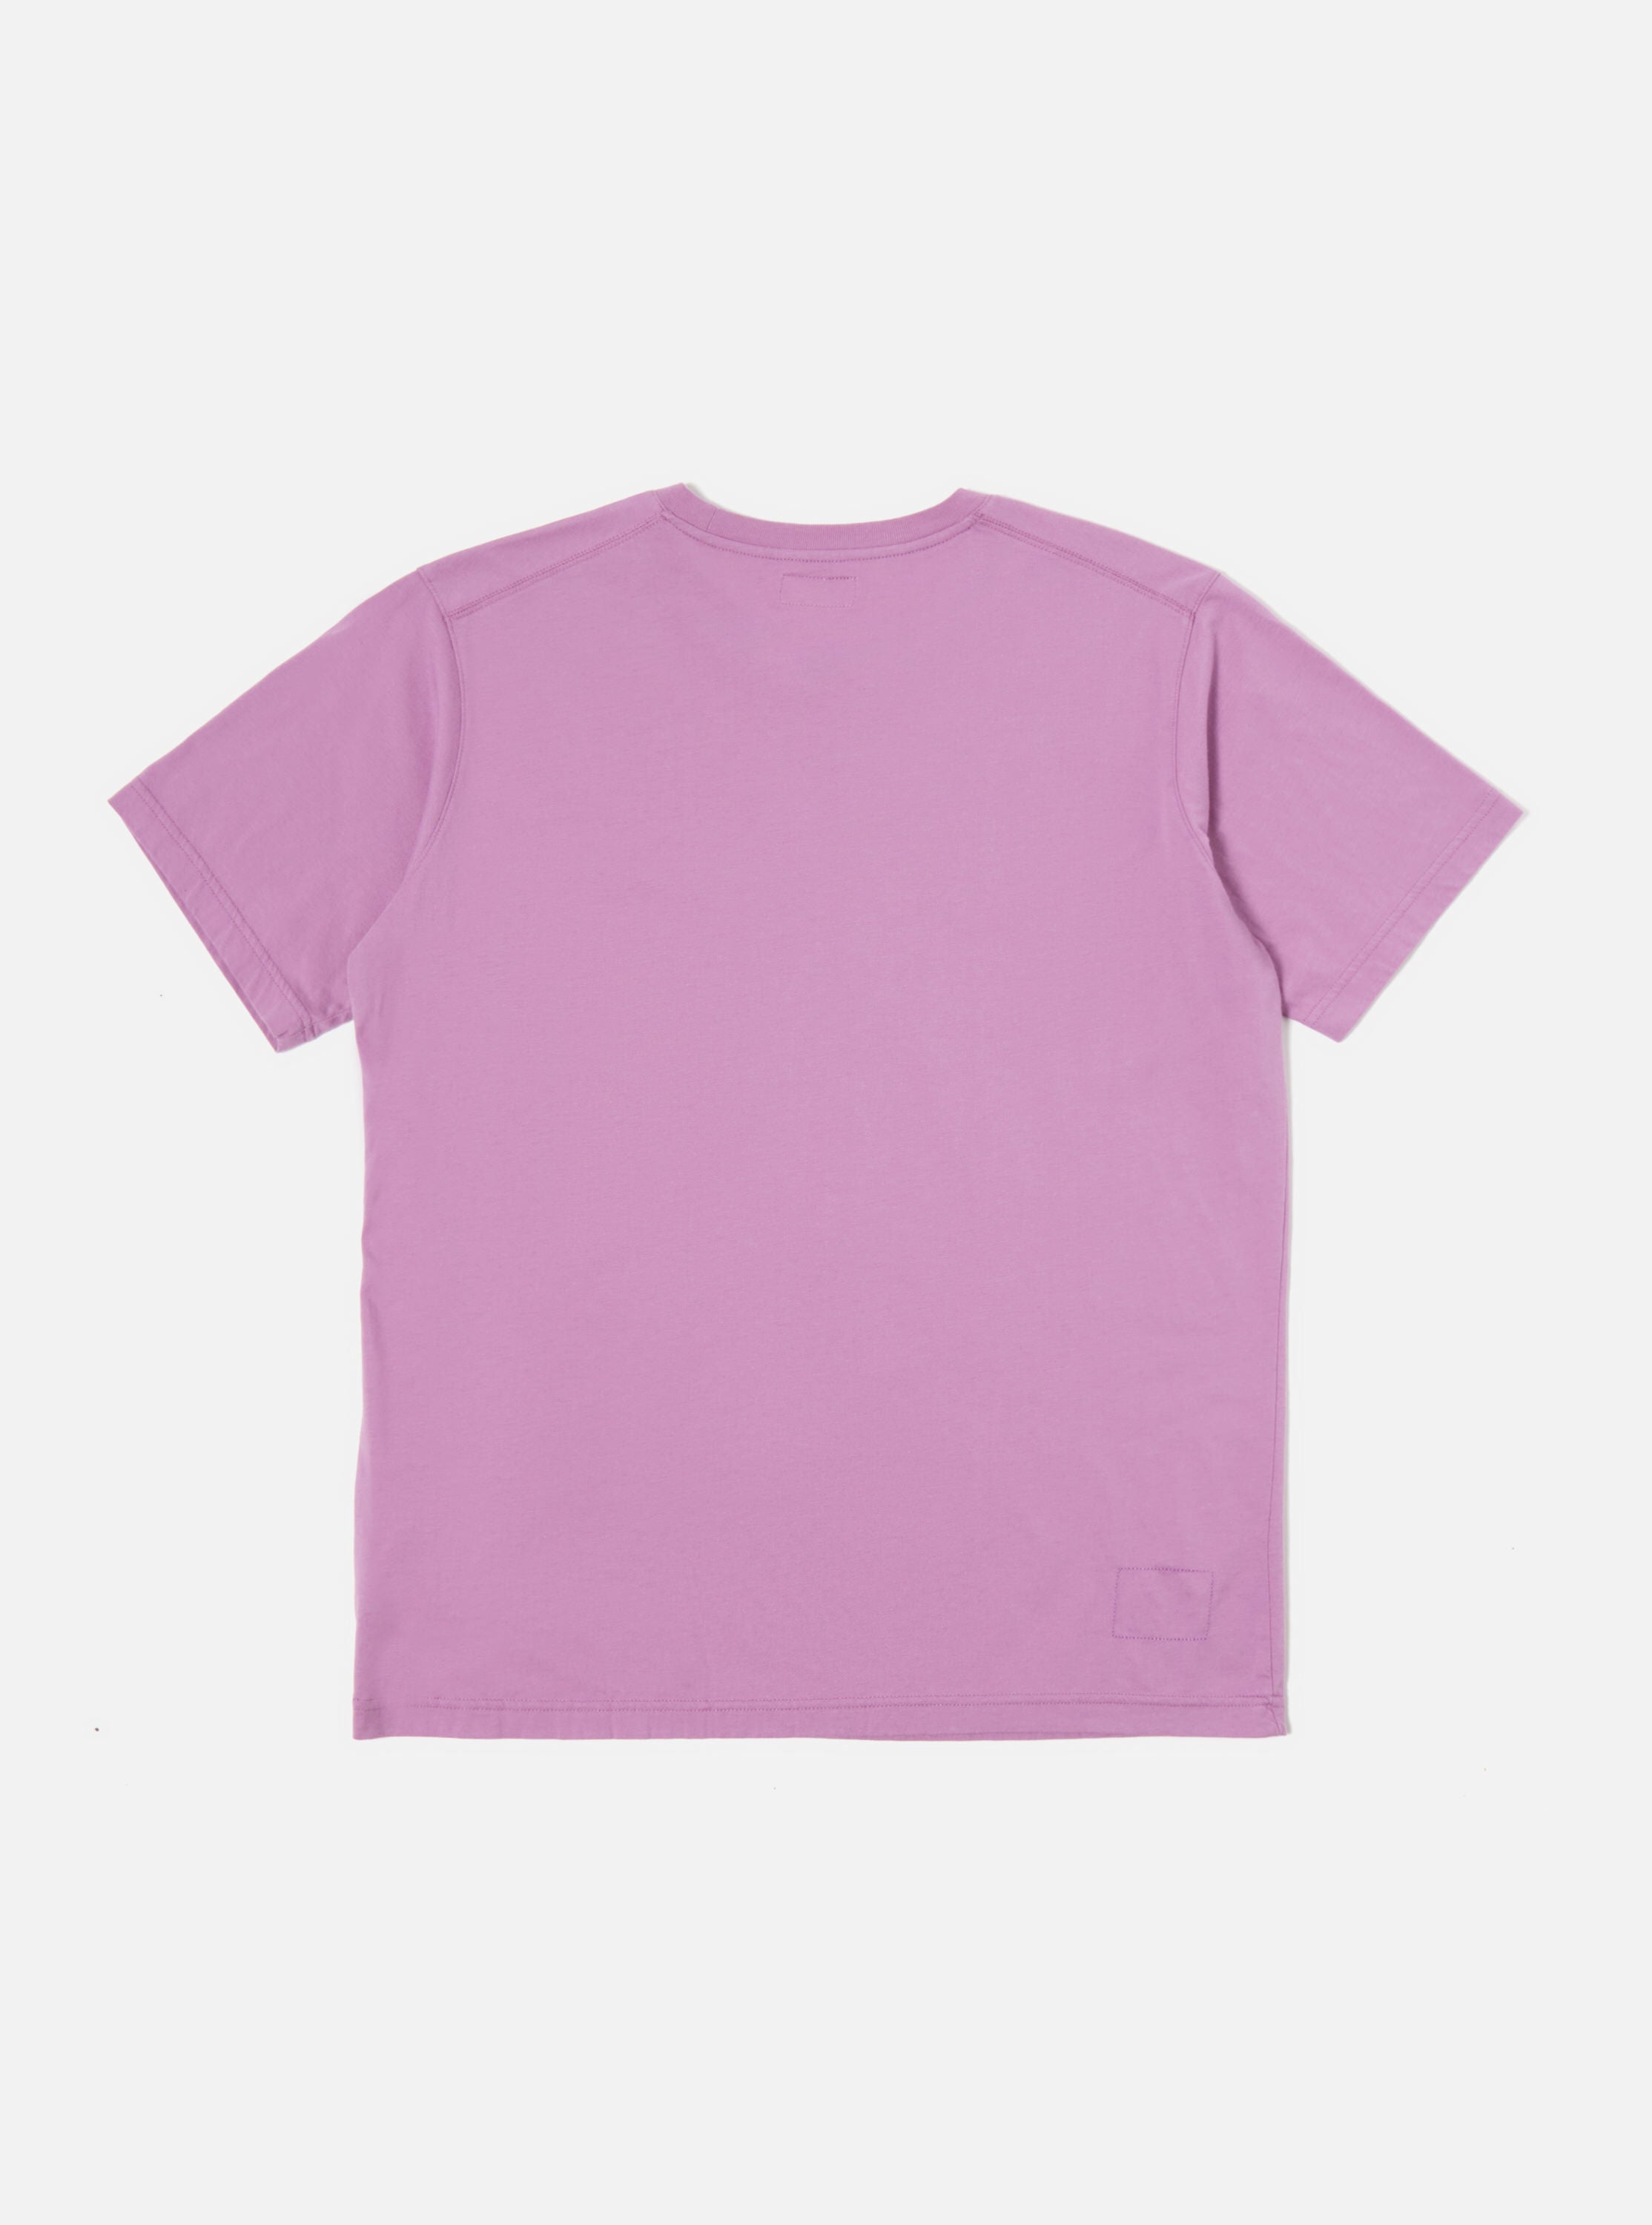 Universal Works Print Pocket Tee in Lilac Organic Jersey